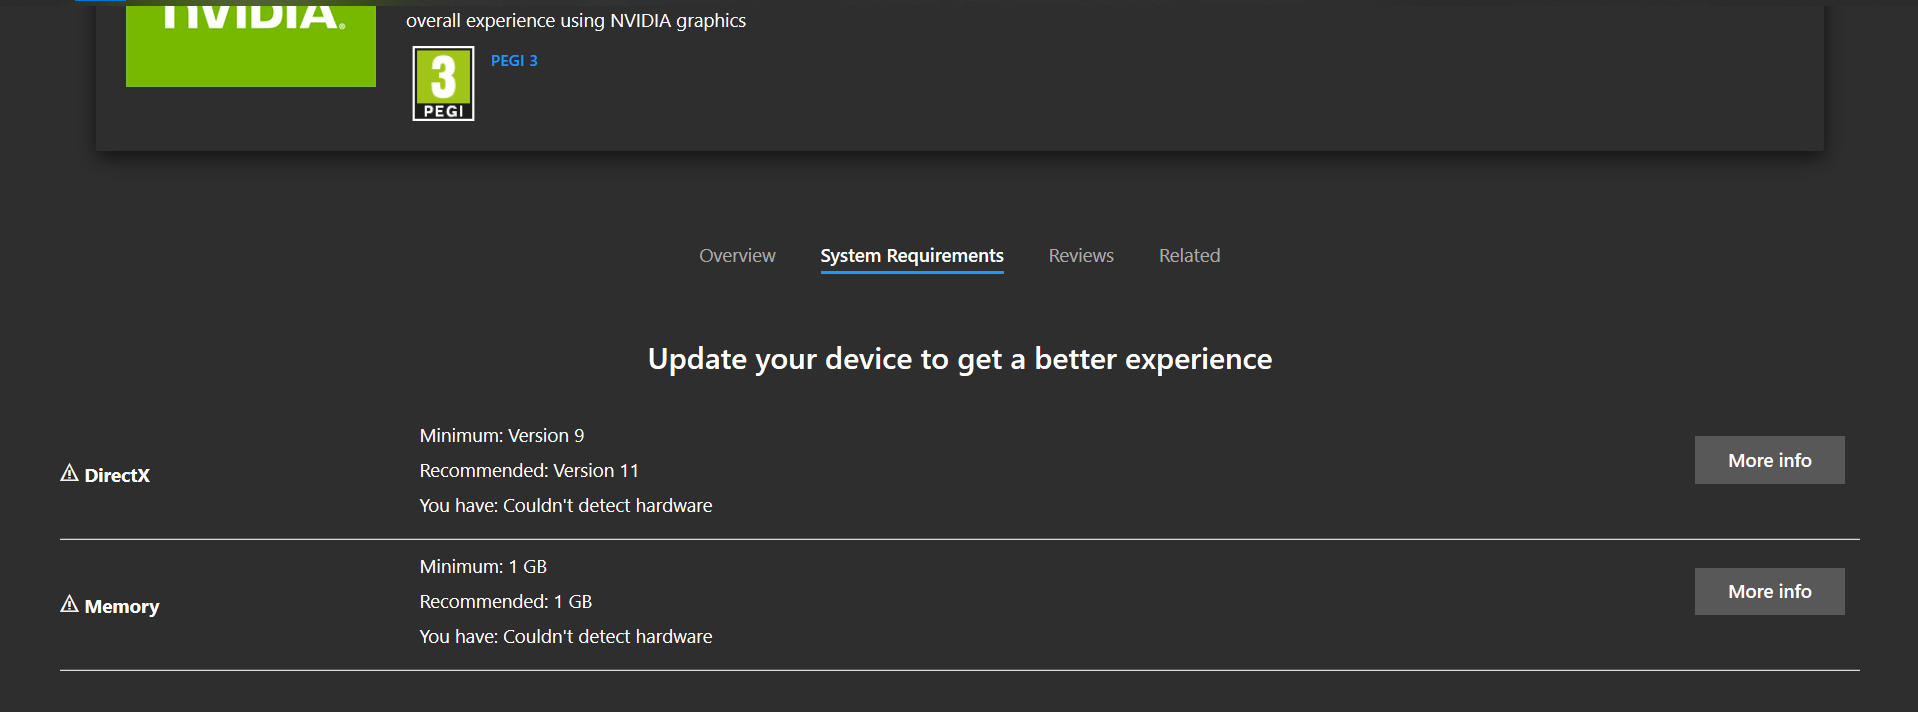 Couldnt detect hardware in microsoft store 74e6477d-7ddb-4462-a685-212e710c1ab1?upload=true.png